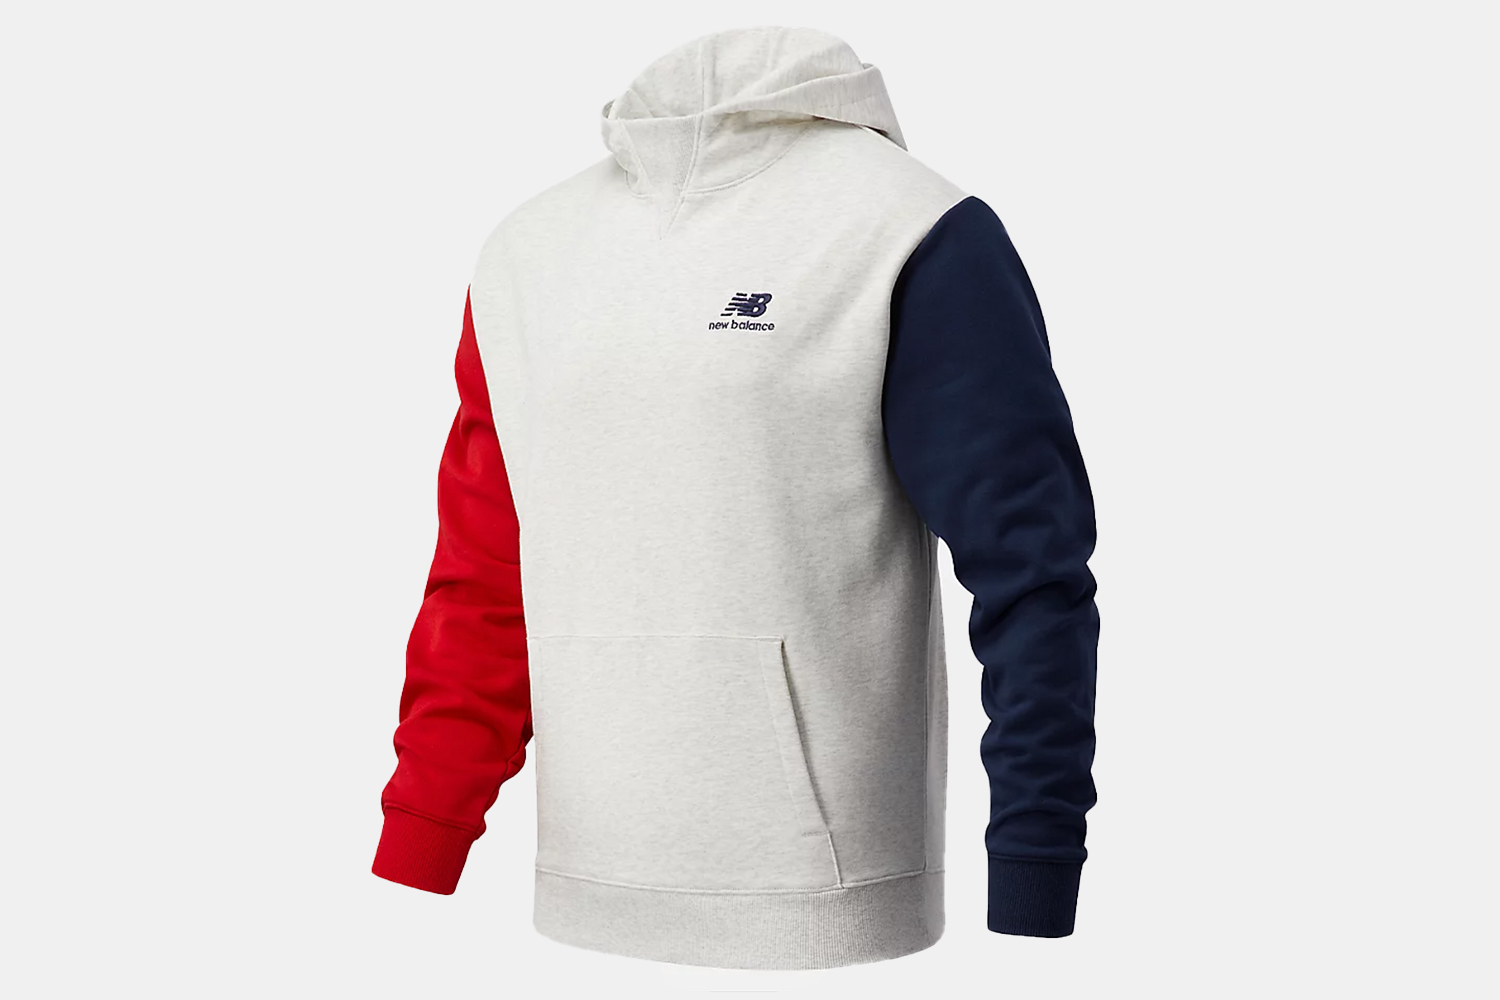 a hoodie tricolored